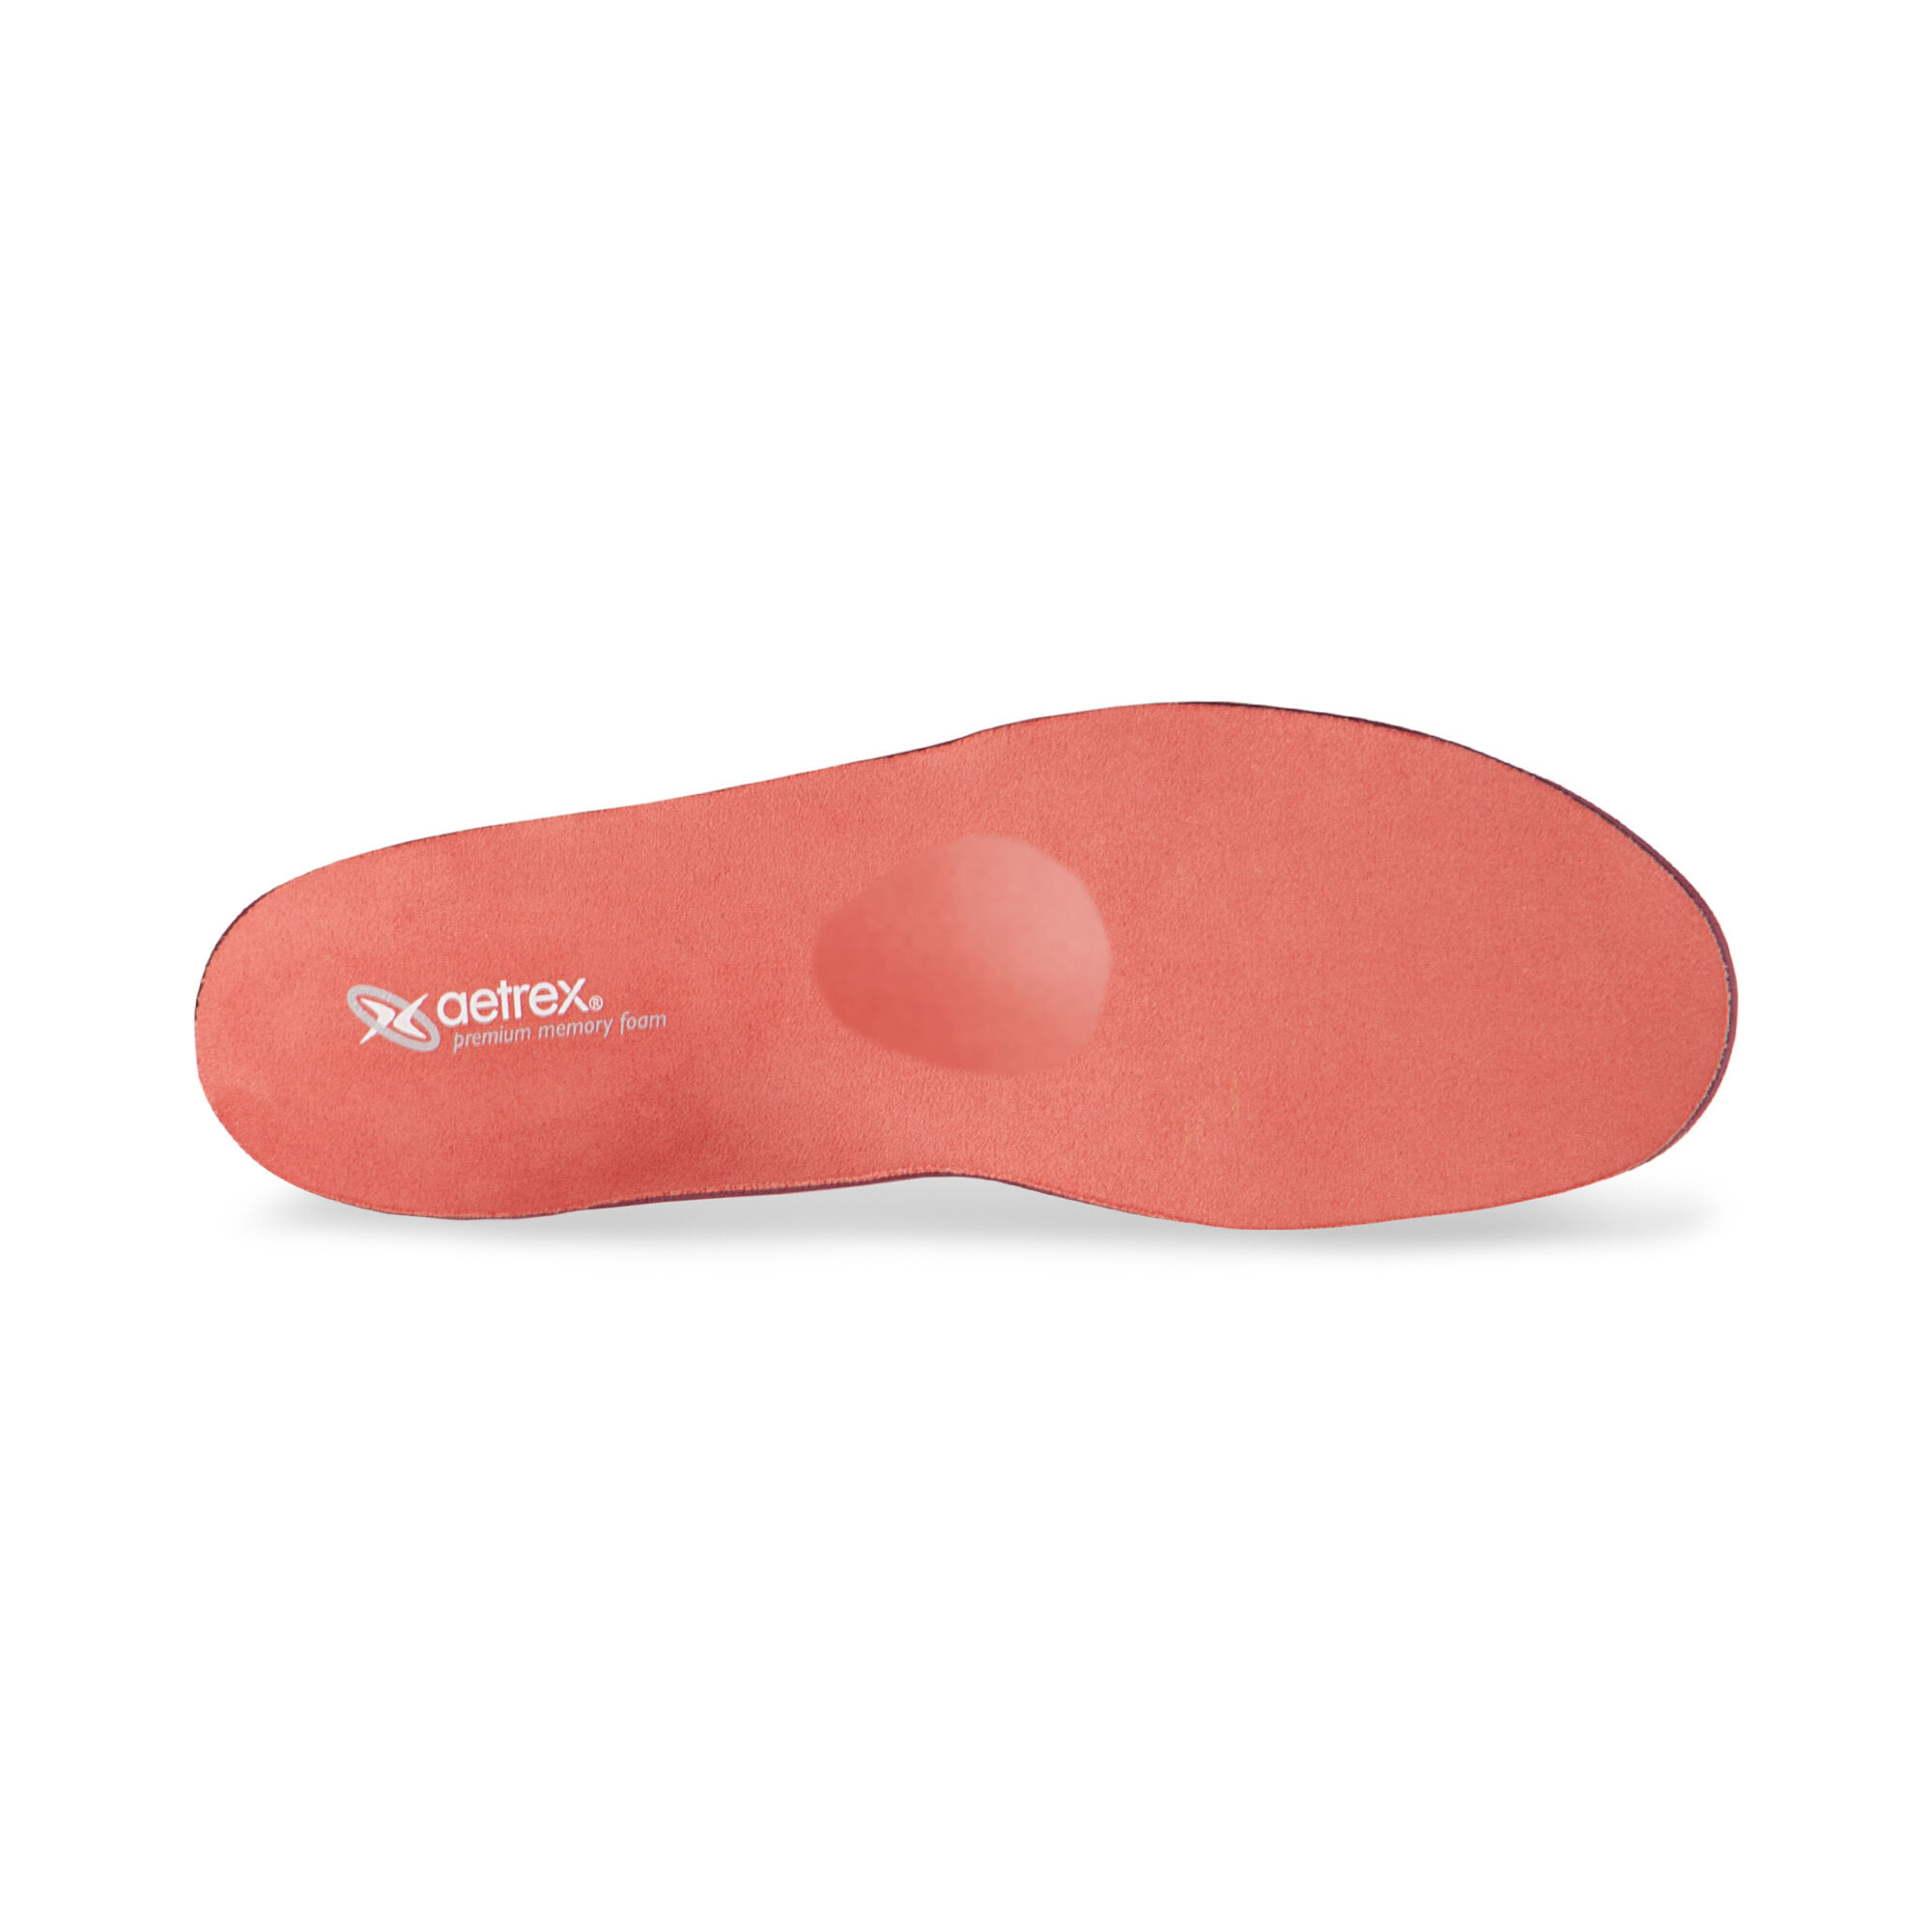 Best Insoles For Standing All Day|Women's Premium Memory Foam 